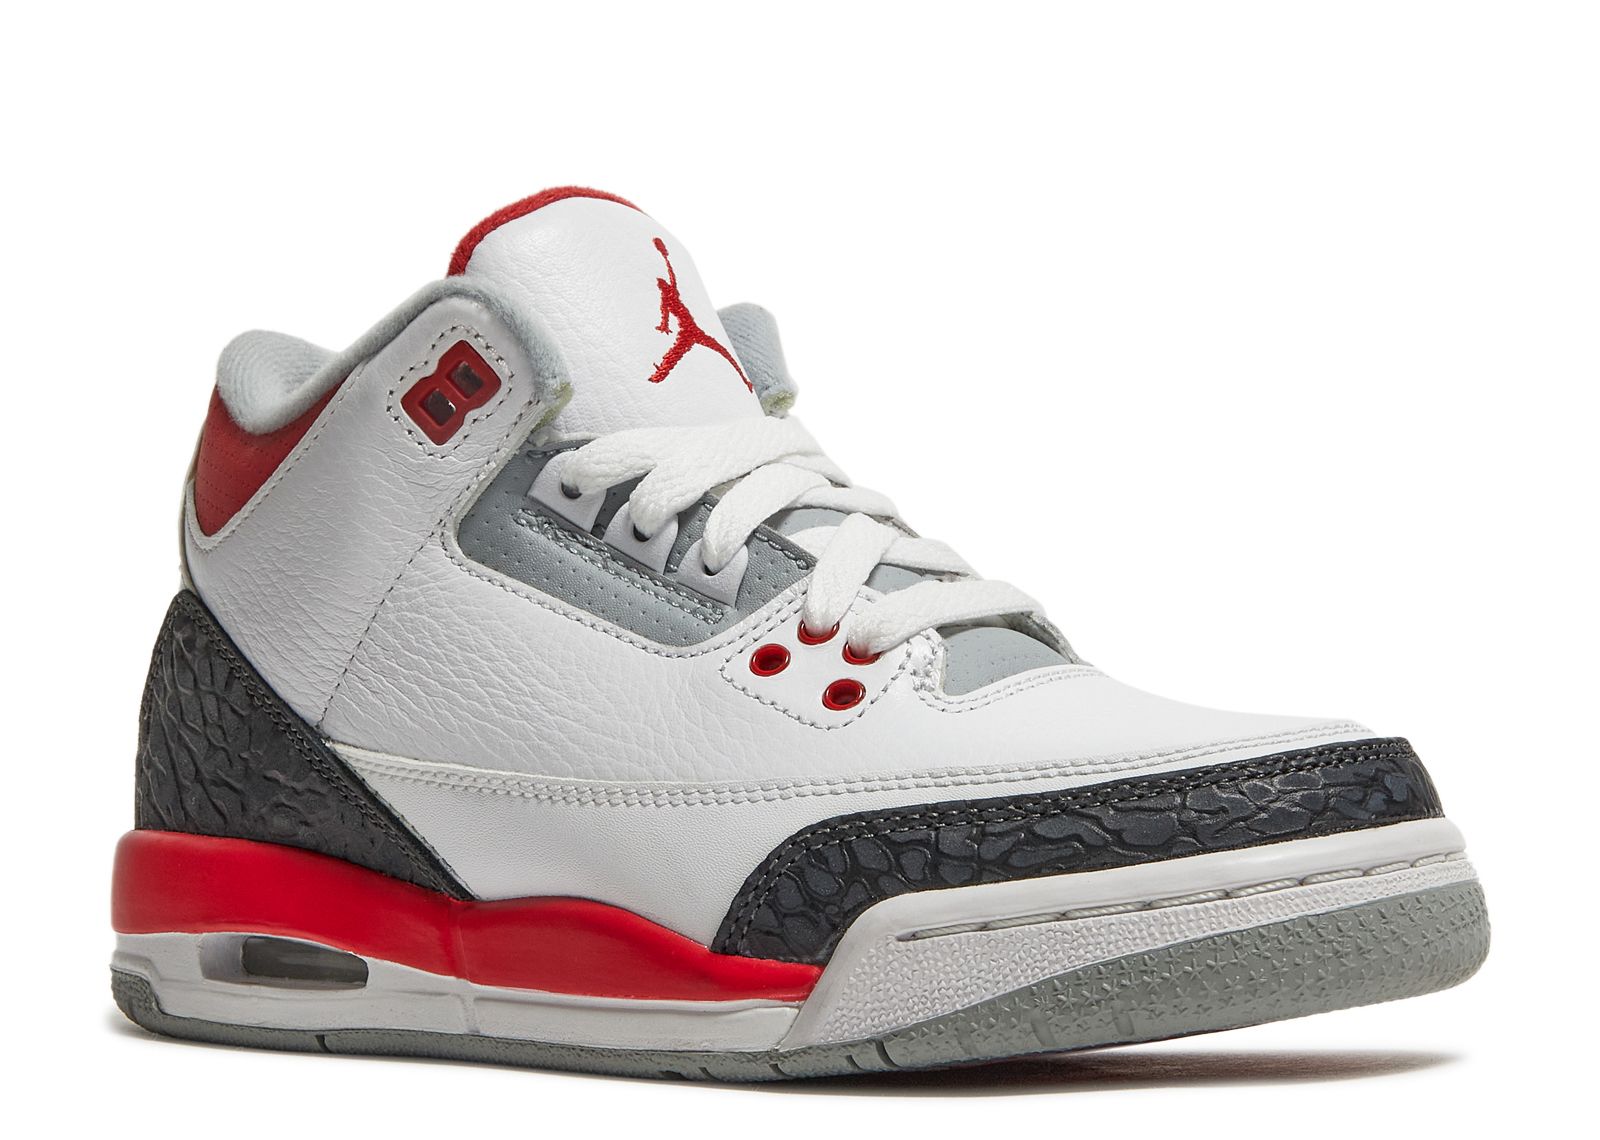 fire red 3s release date